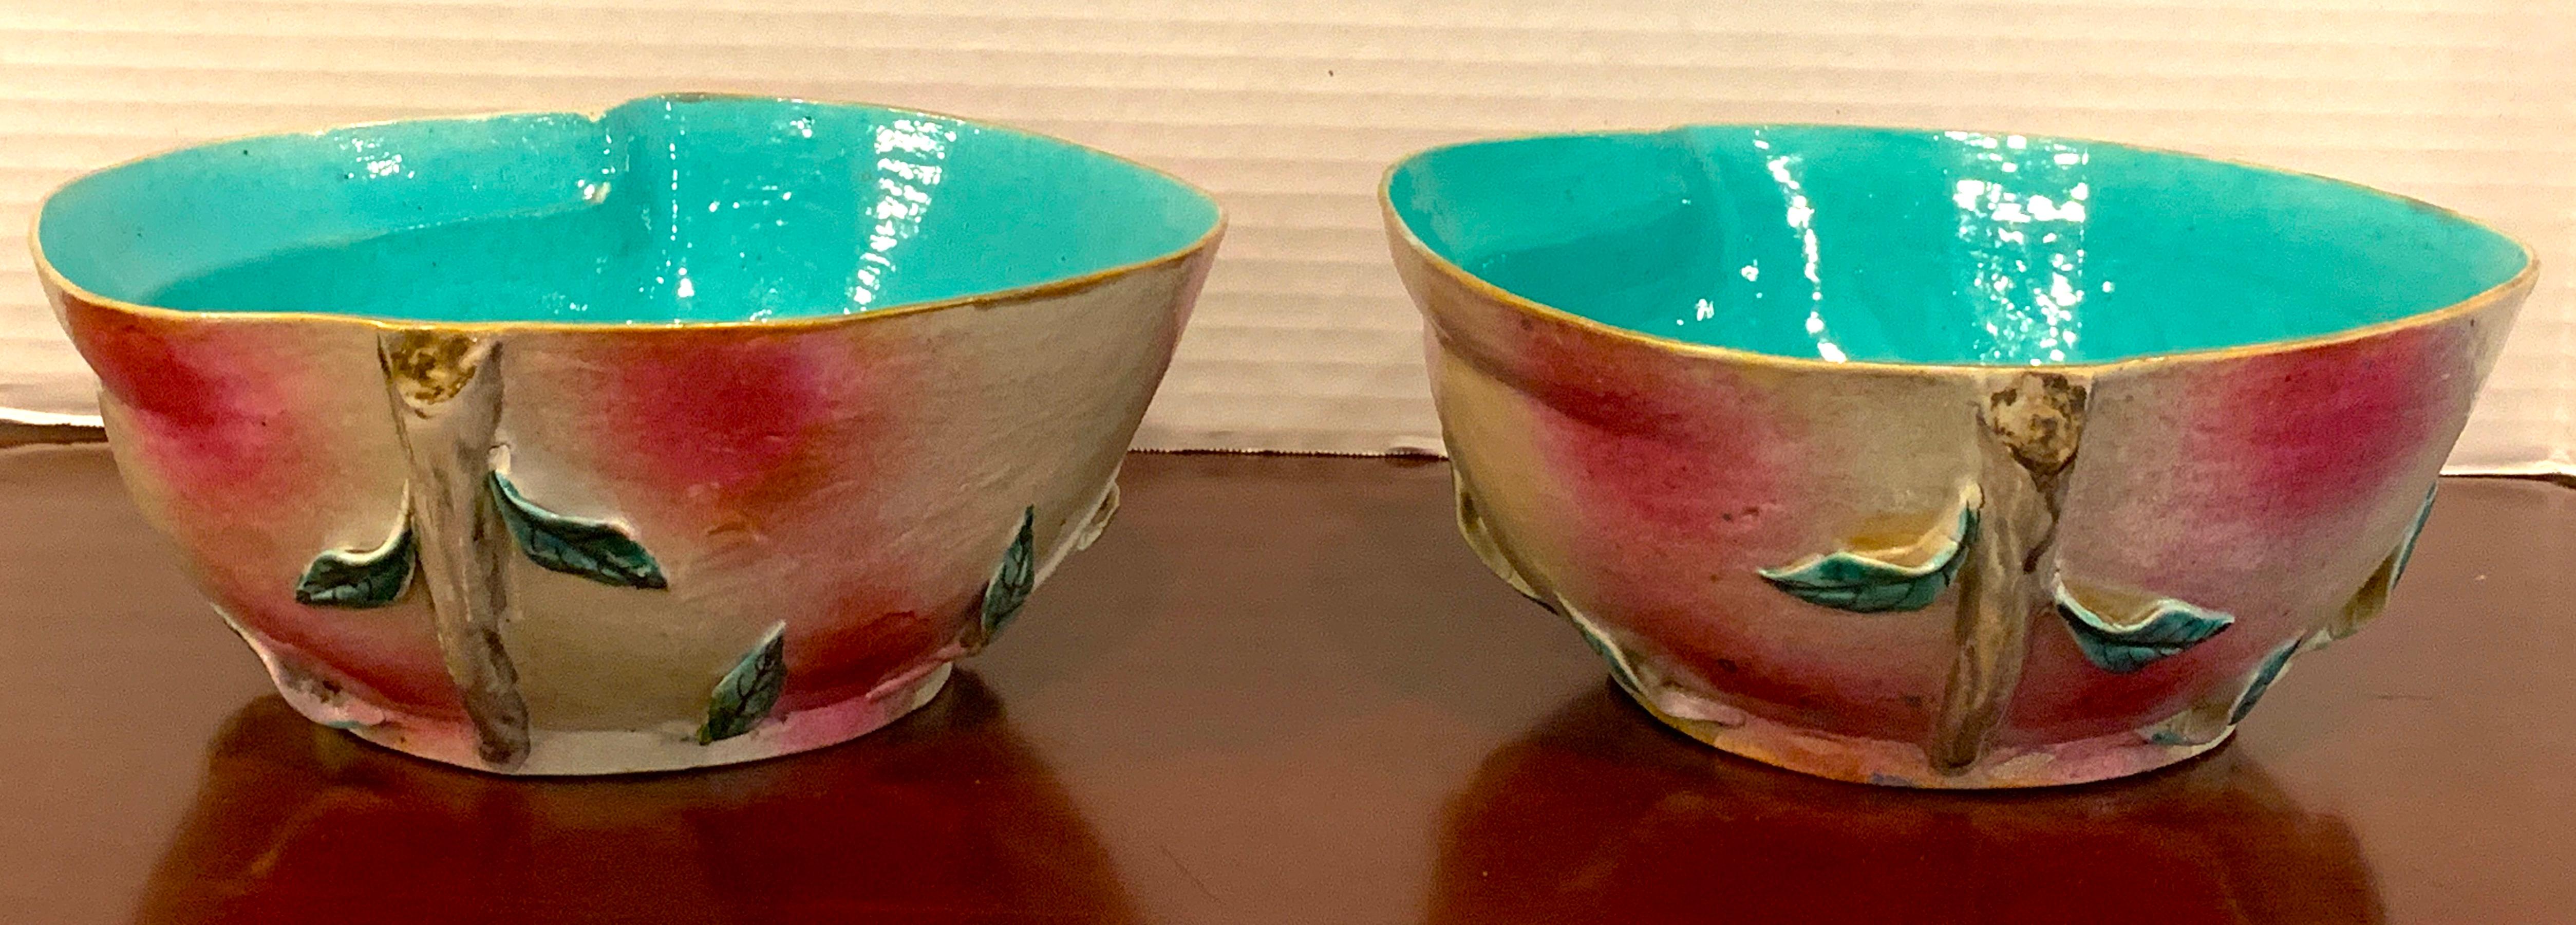 Pair of Chinese Export Famille Rose Altar Fruit Peach Bowls For Sale 3